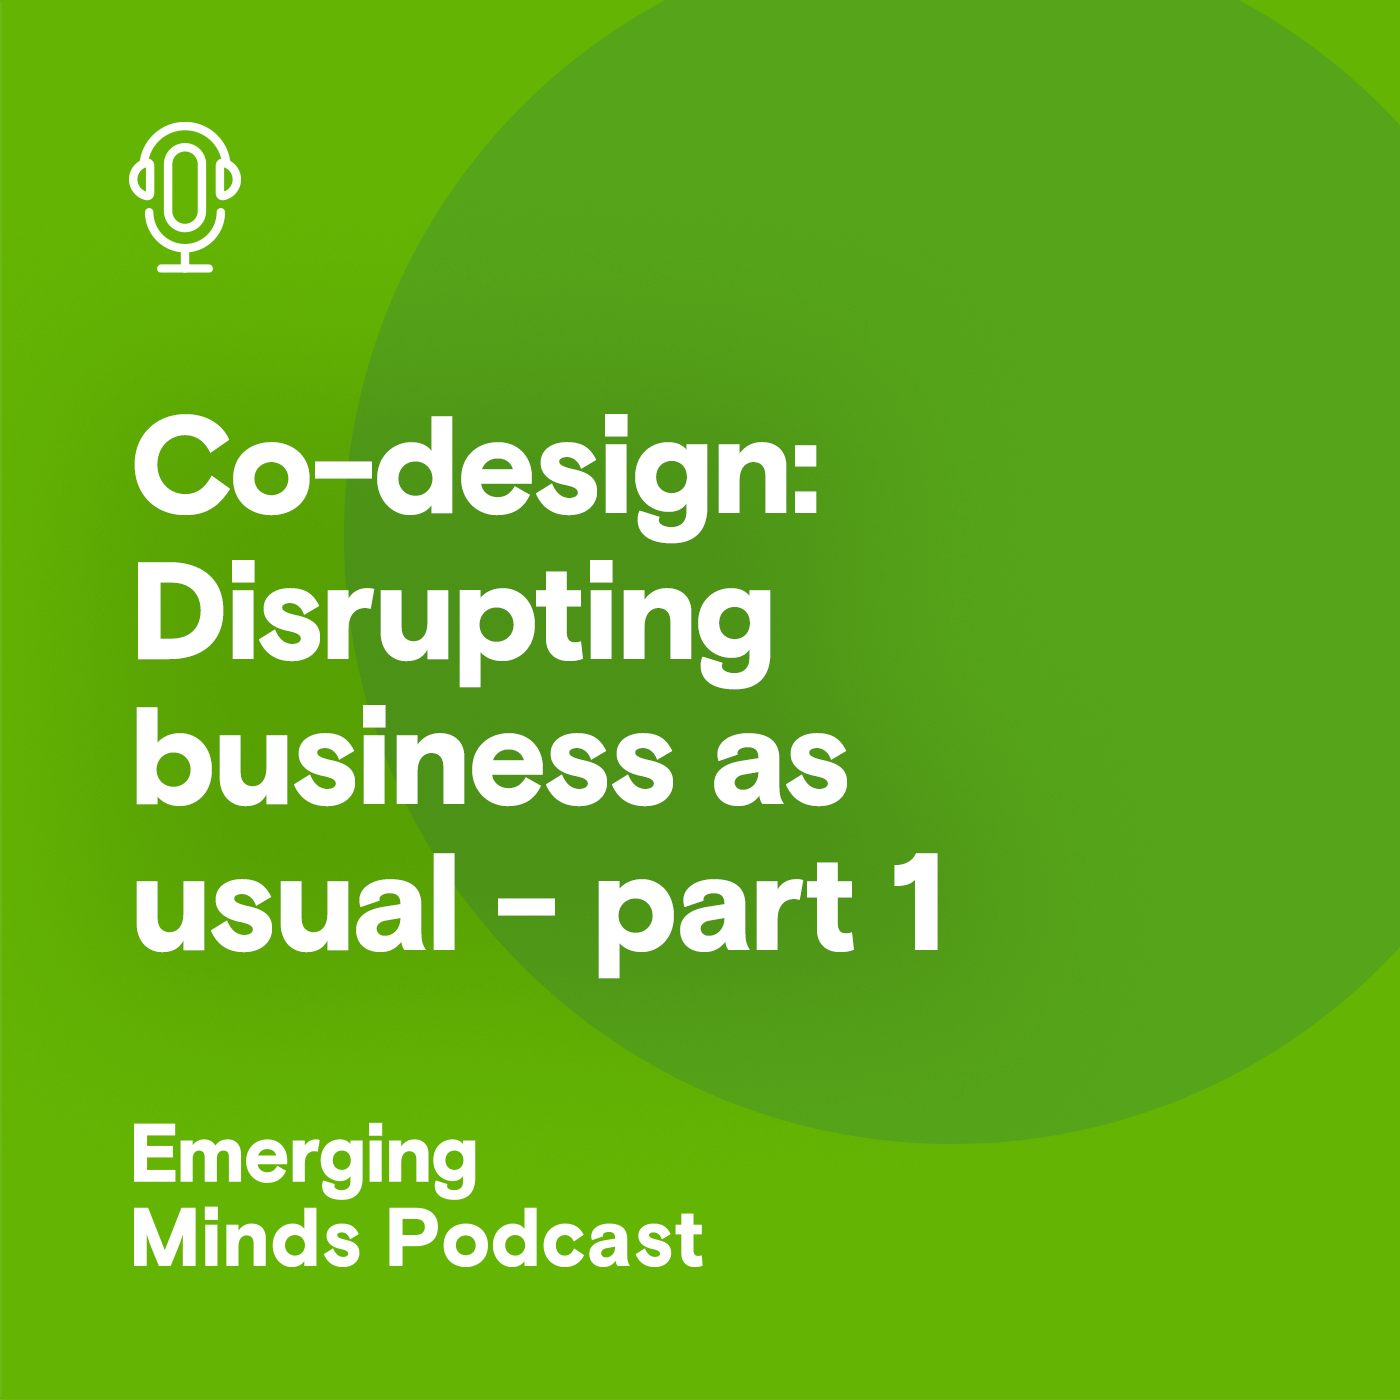 Co-design: Disrupting business as usual - part one